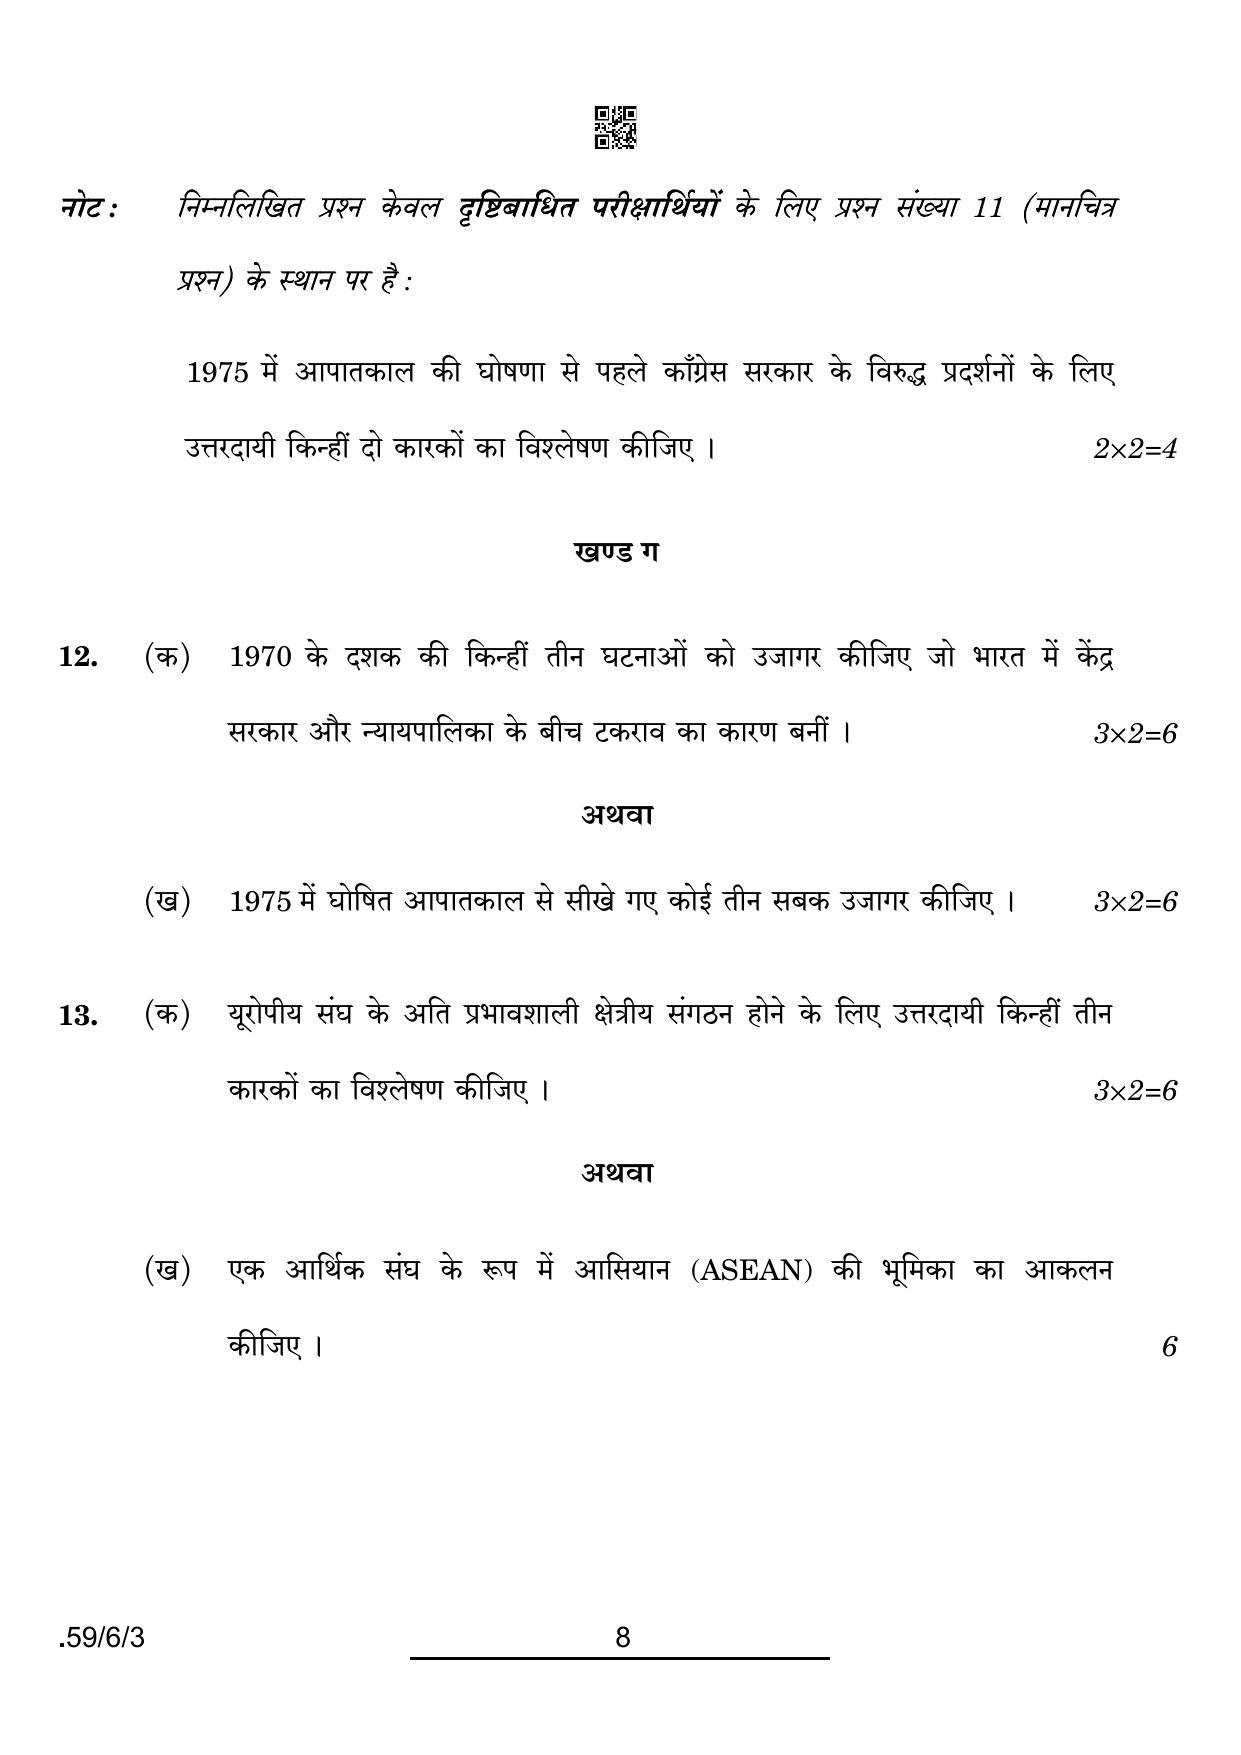 CBSE Class 12 59-6-3 POL SCIENCE 2022 Compartment Question Paper - Page 8